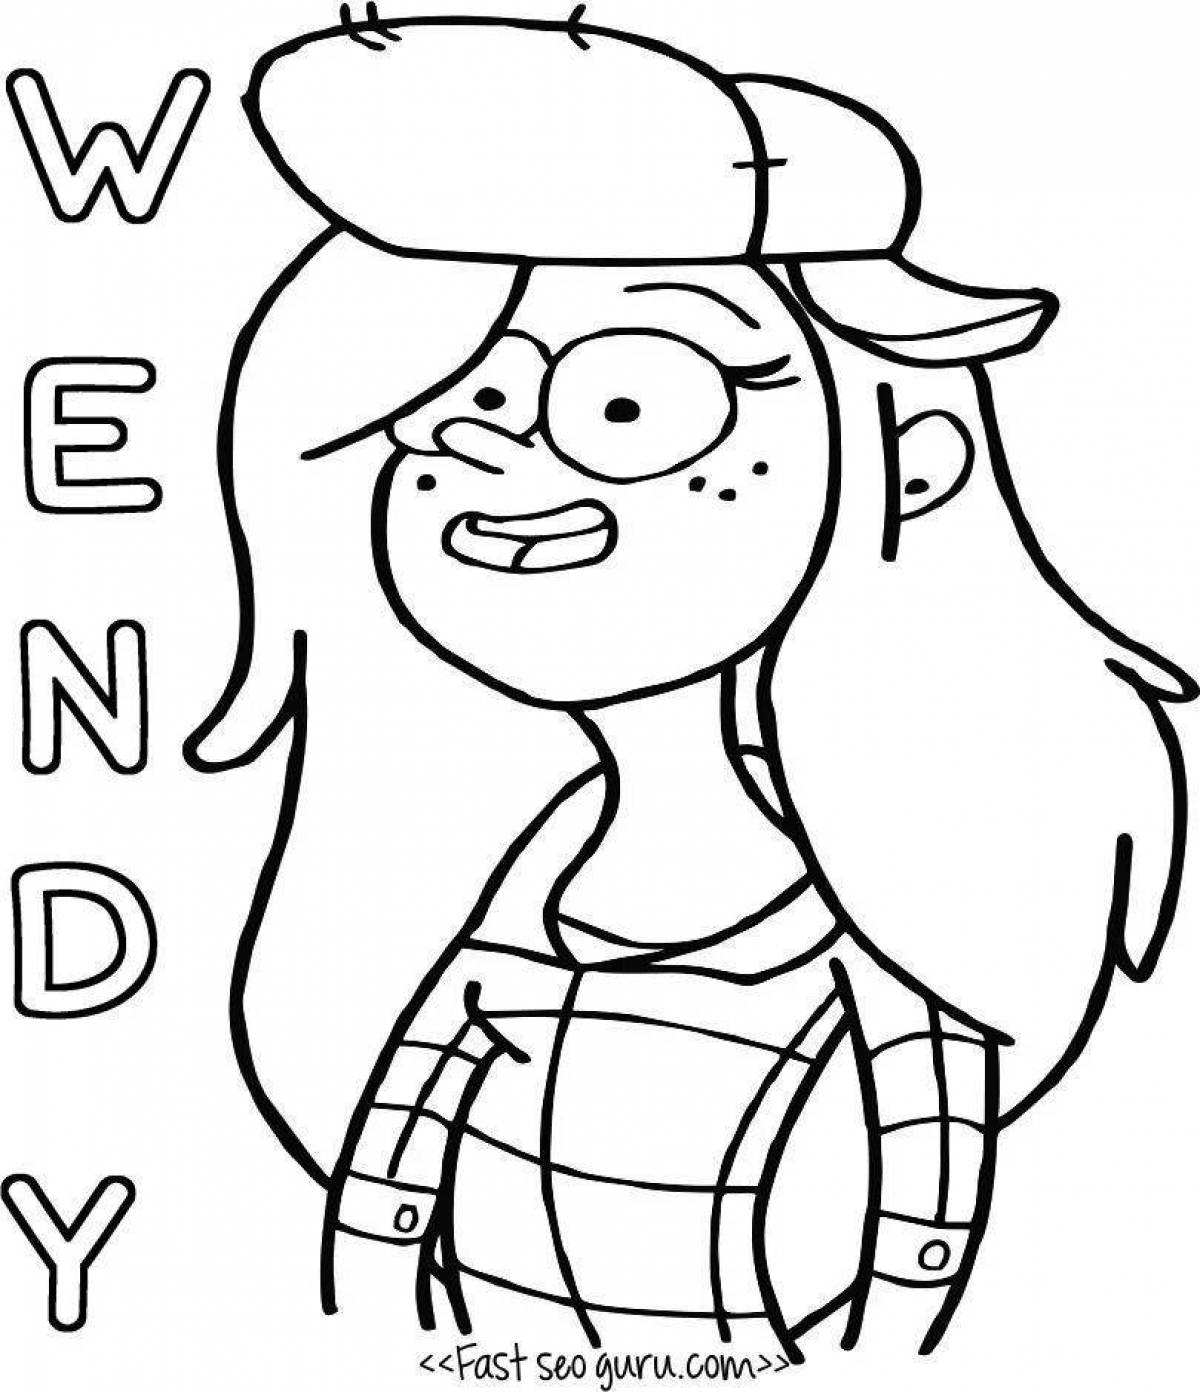 Charming wendy coloring book